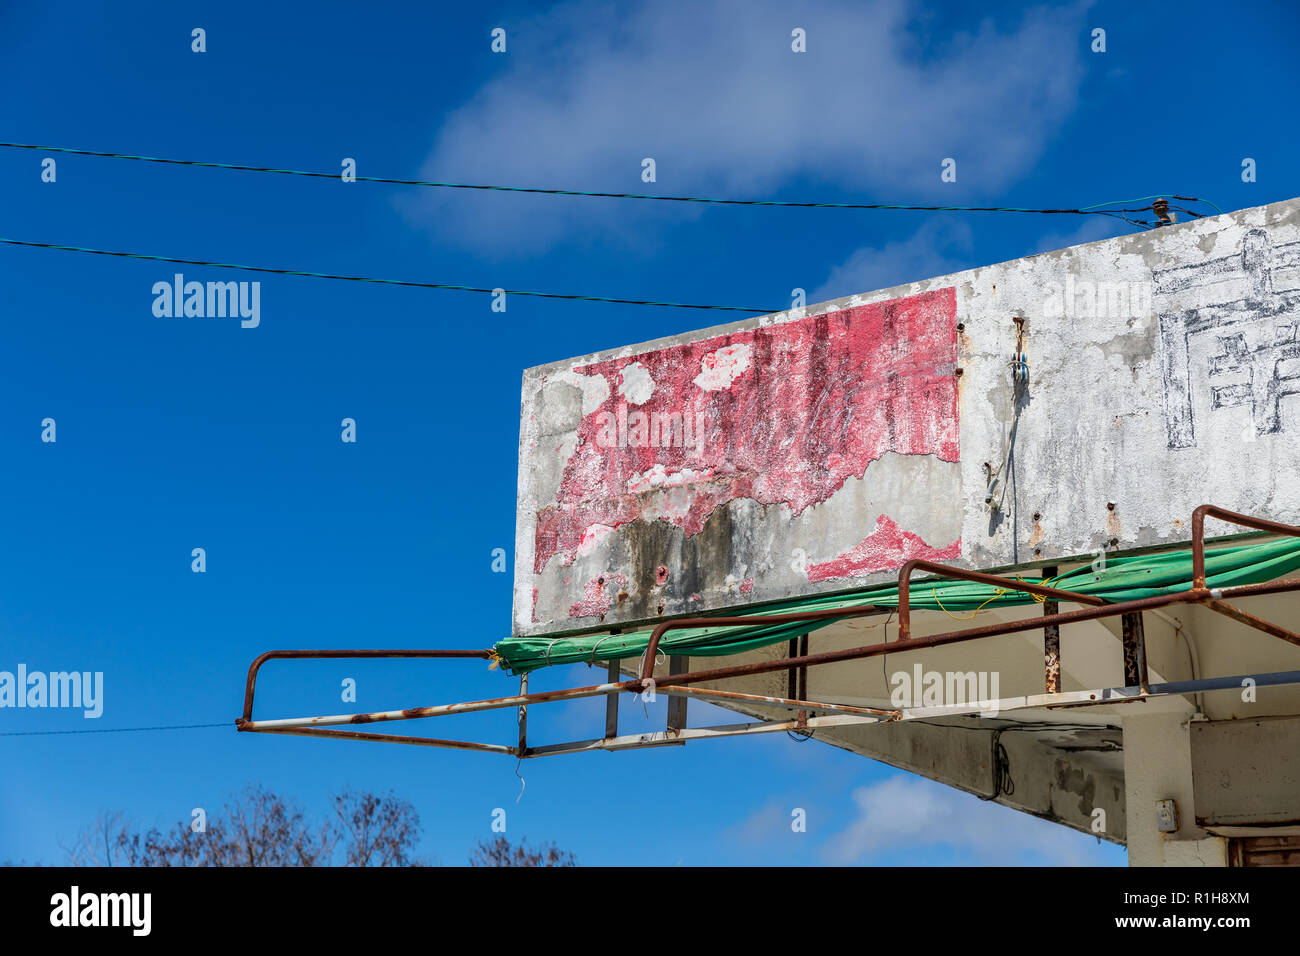 Old, partly disintegrated Coca-Cola sign on concrete roof next to Japanese character 'minami' ('south'); Itoman, Okinawa, Japan Stock Photo